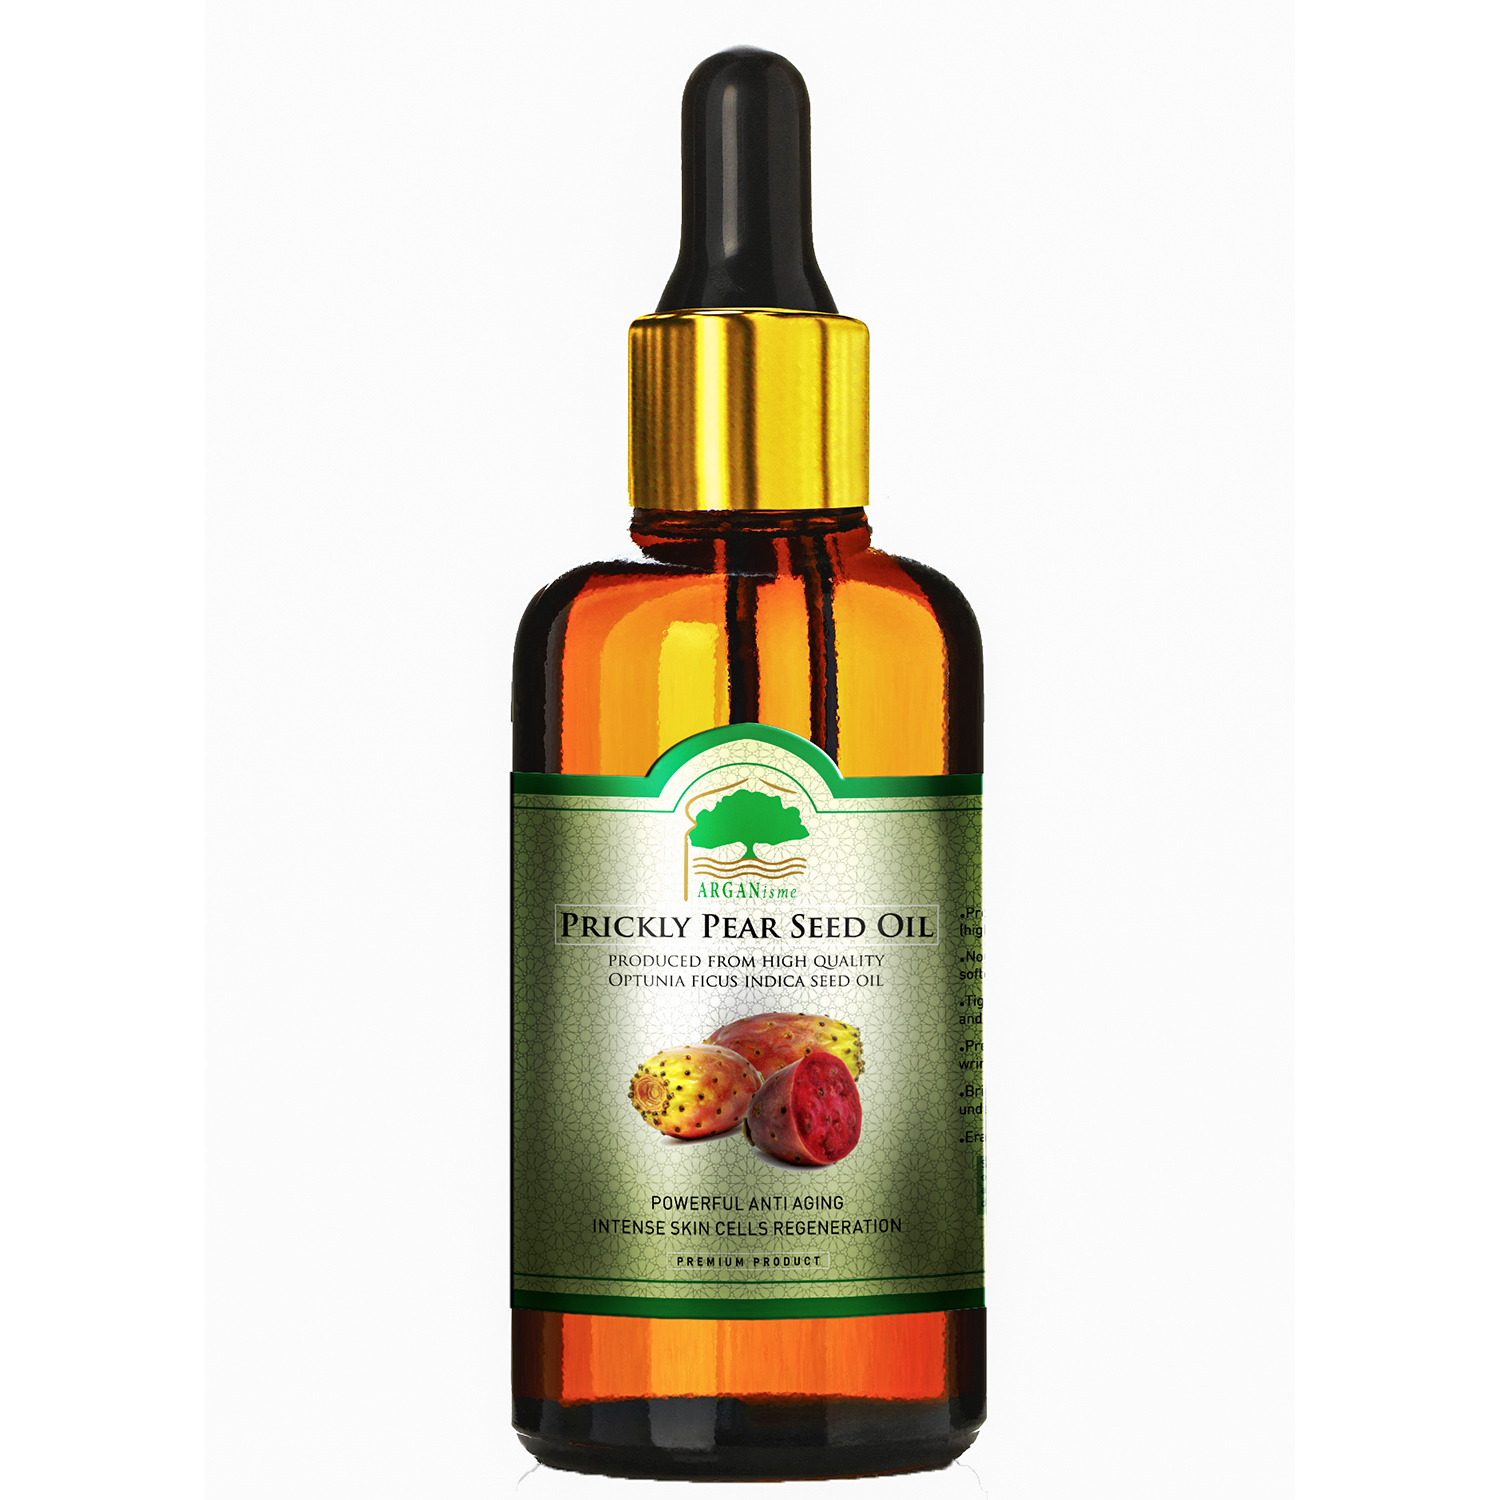 Prickly pear seed oil manufacturer